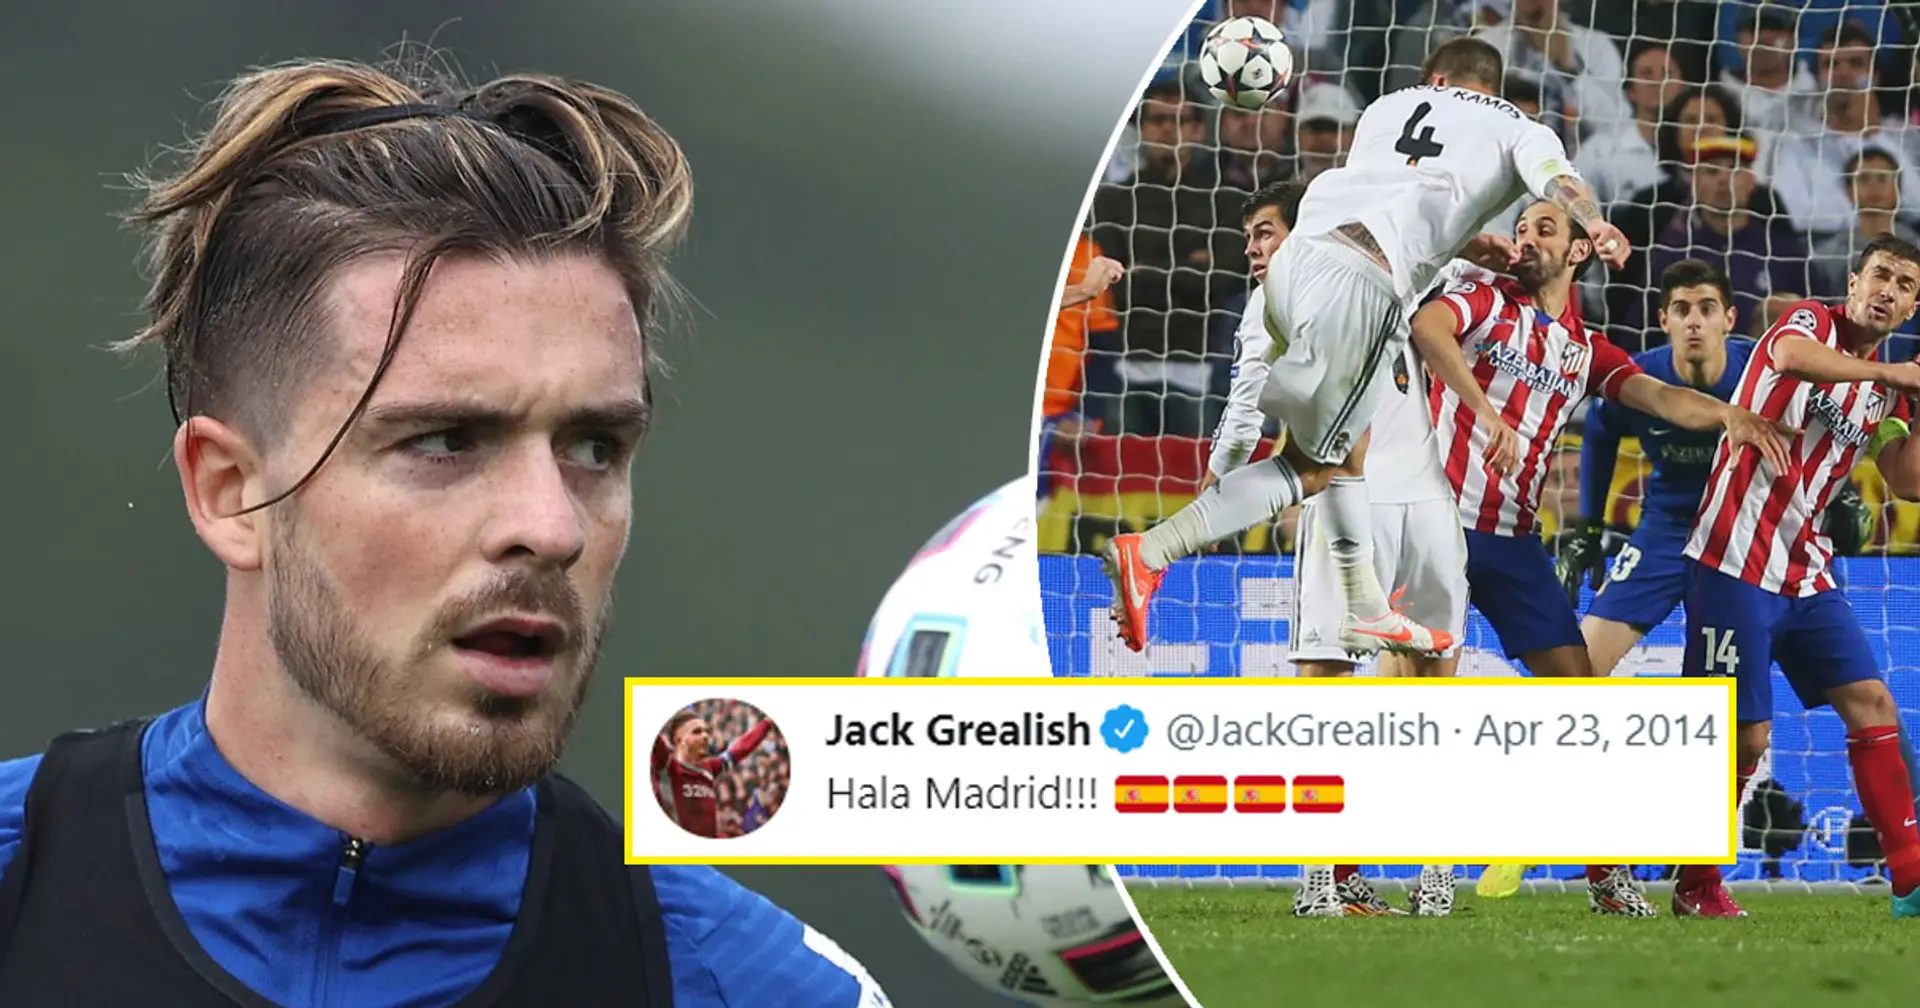 Jack Grealish's old tweet shows he has great affection for Real Madrid